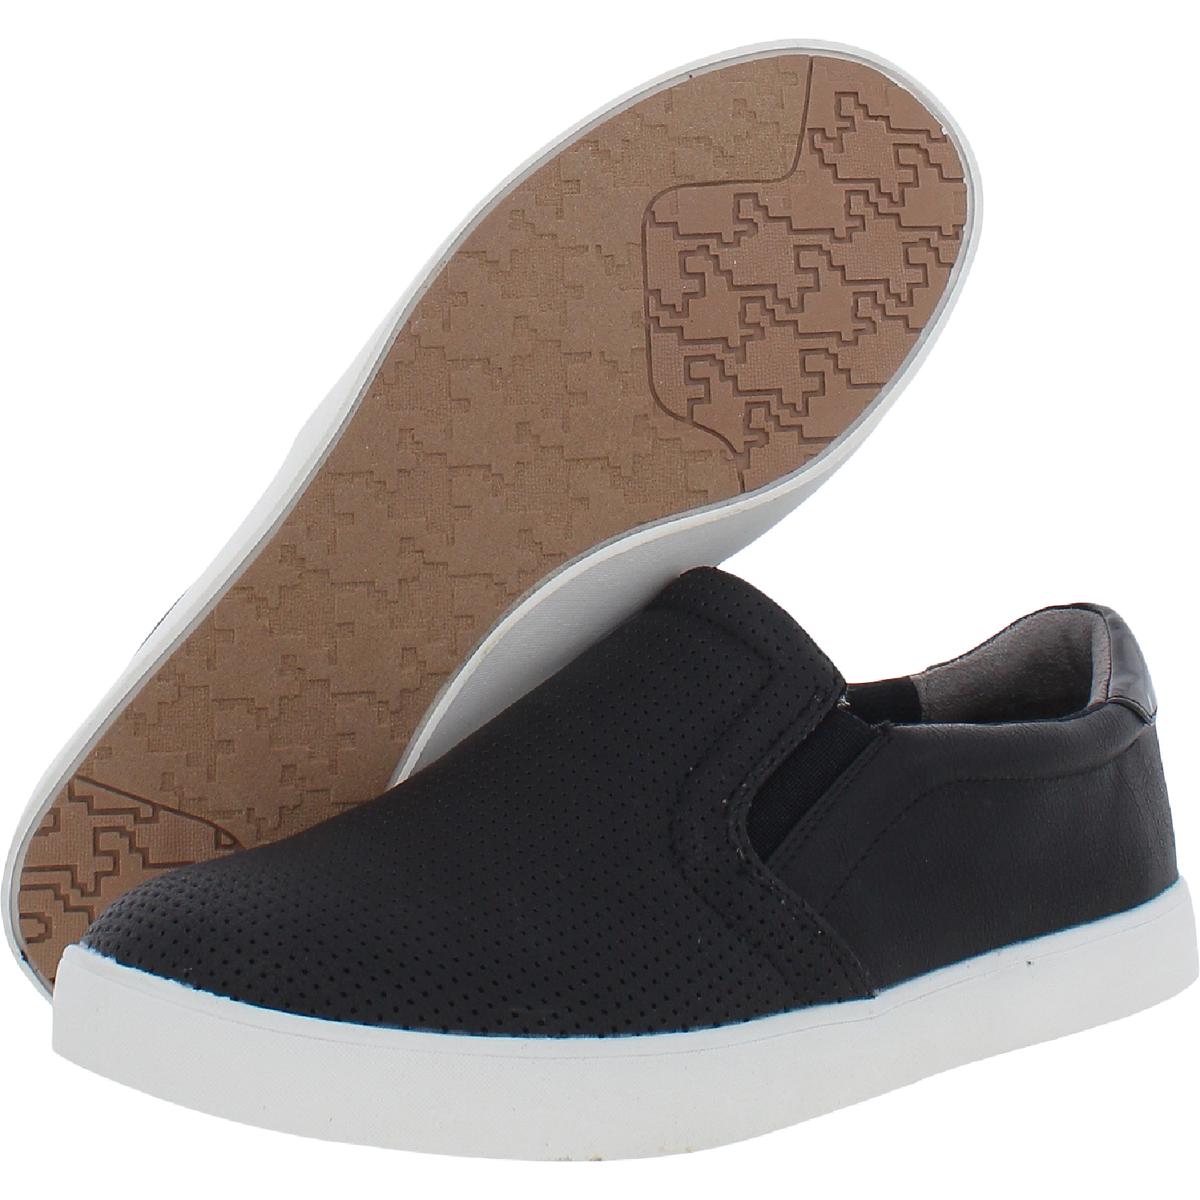 Dr. Scholl's Madison Womens Lifestyle Slip-On Sneakers